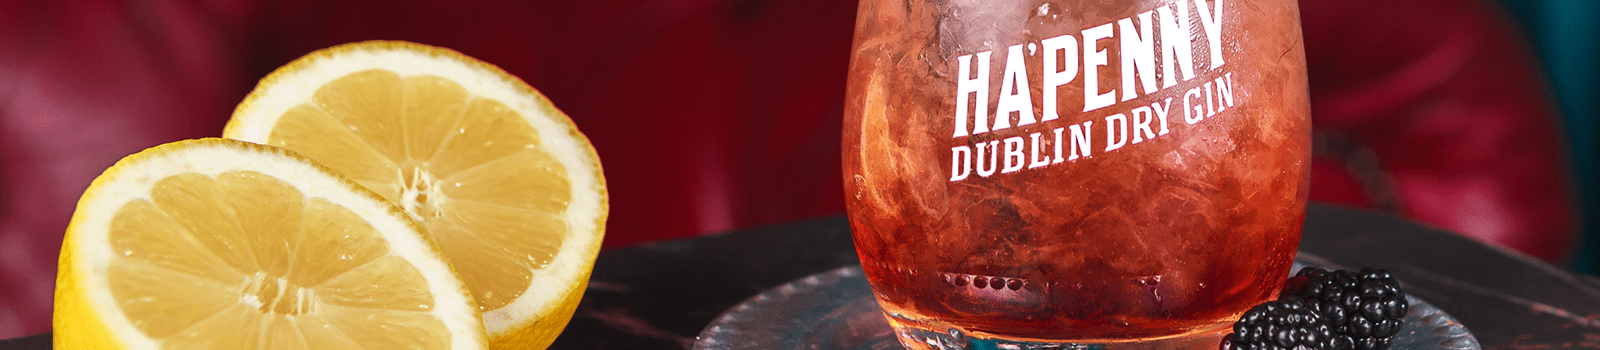 Ha'Penny Dublin Dry Gin, Alltech Beverage Division Ireland, Trajectory Beverage Partners